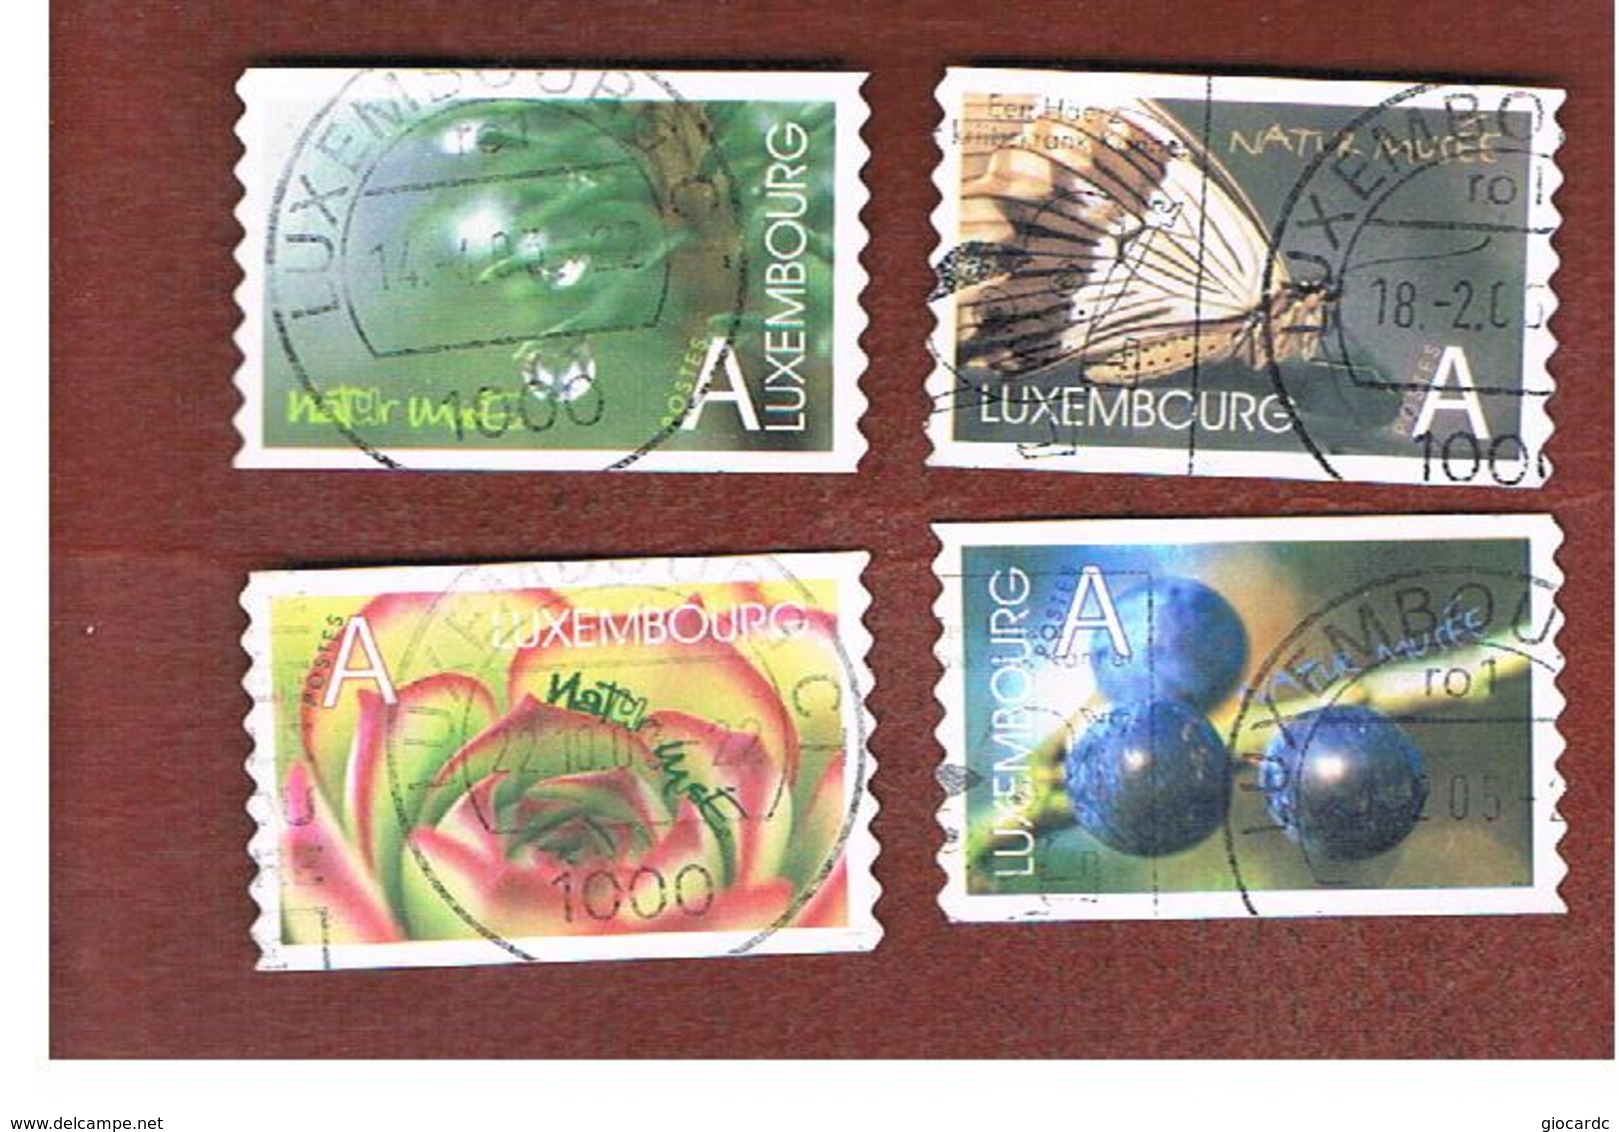 LUSSEMBURGO (LUXEMBOURG)   -   SG 1625.1628  -   2002  NATURAL HISTORY MUSEUM (COMPLET SET OF 4)      -  USED - Usati